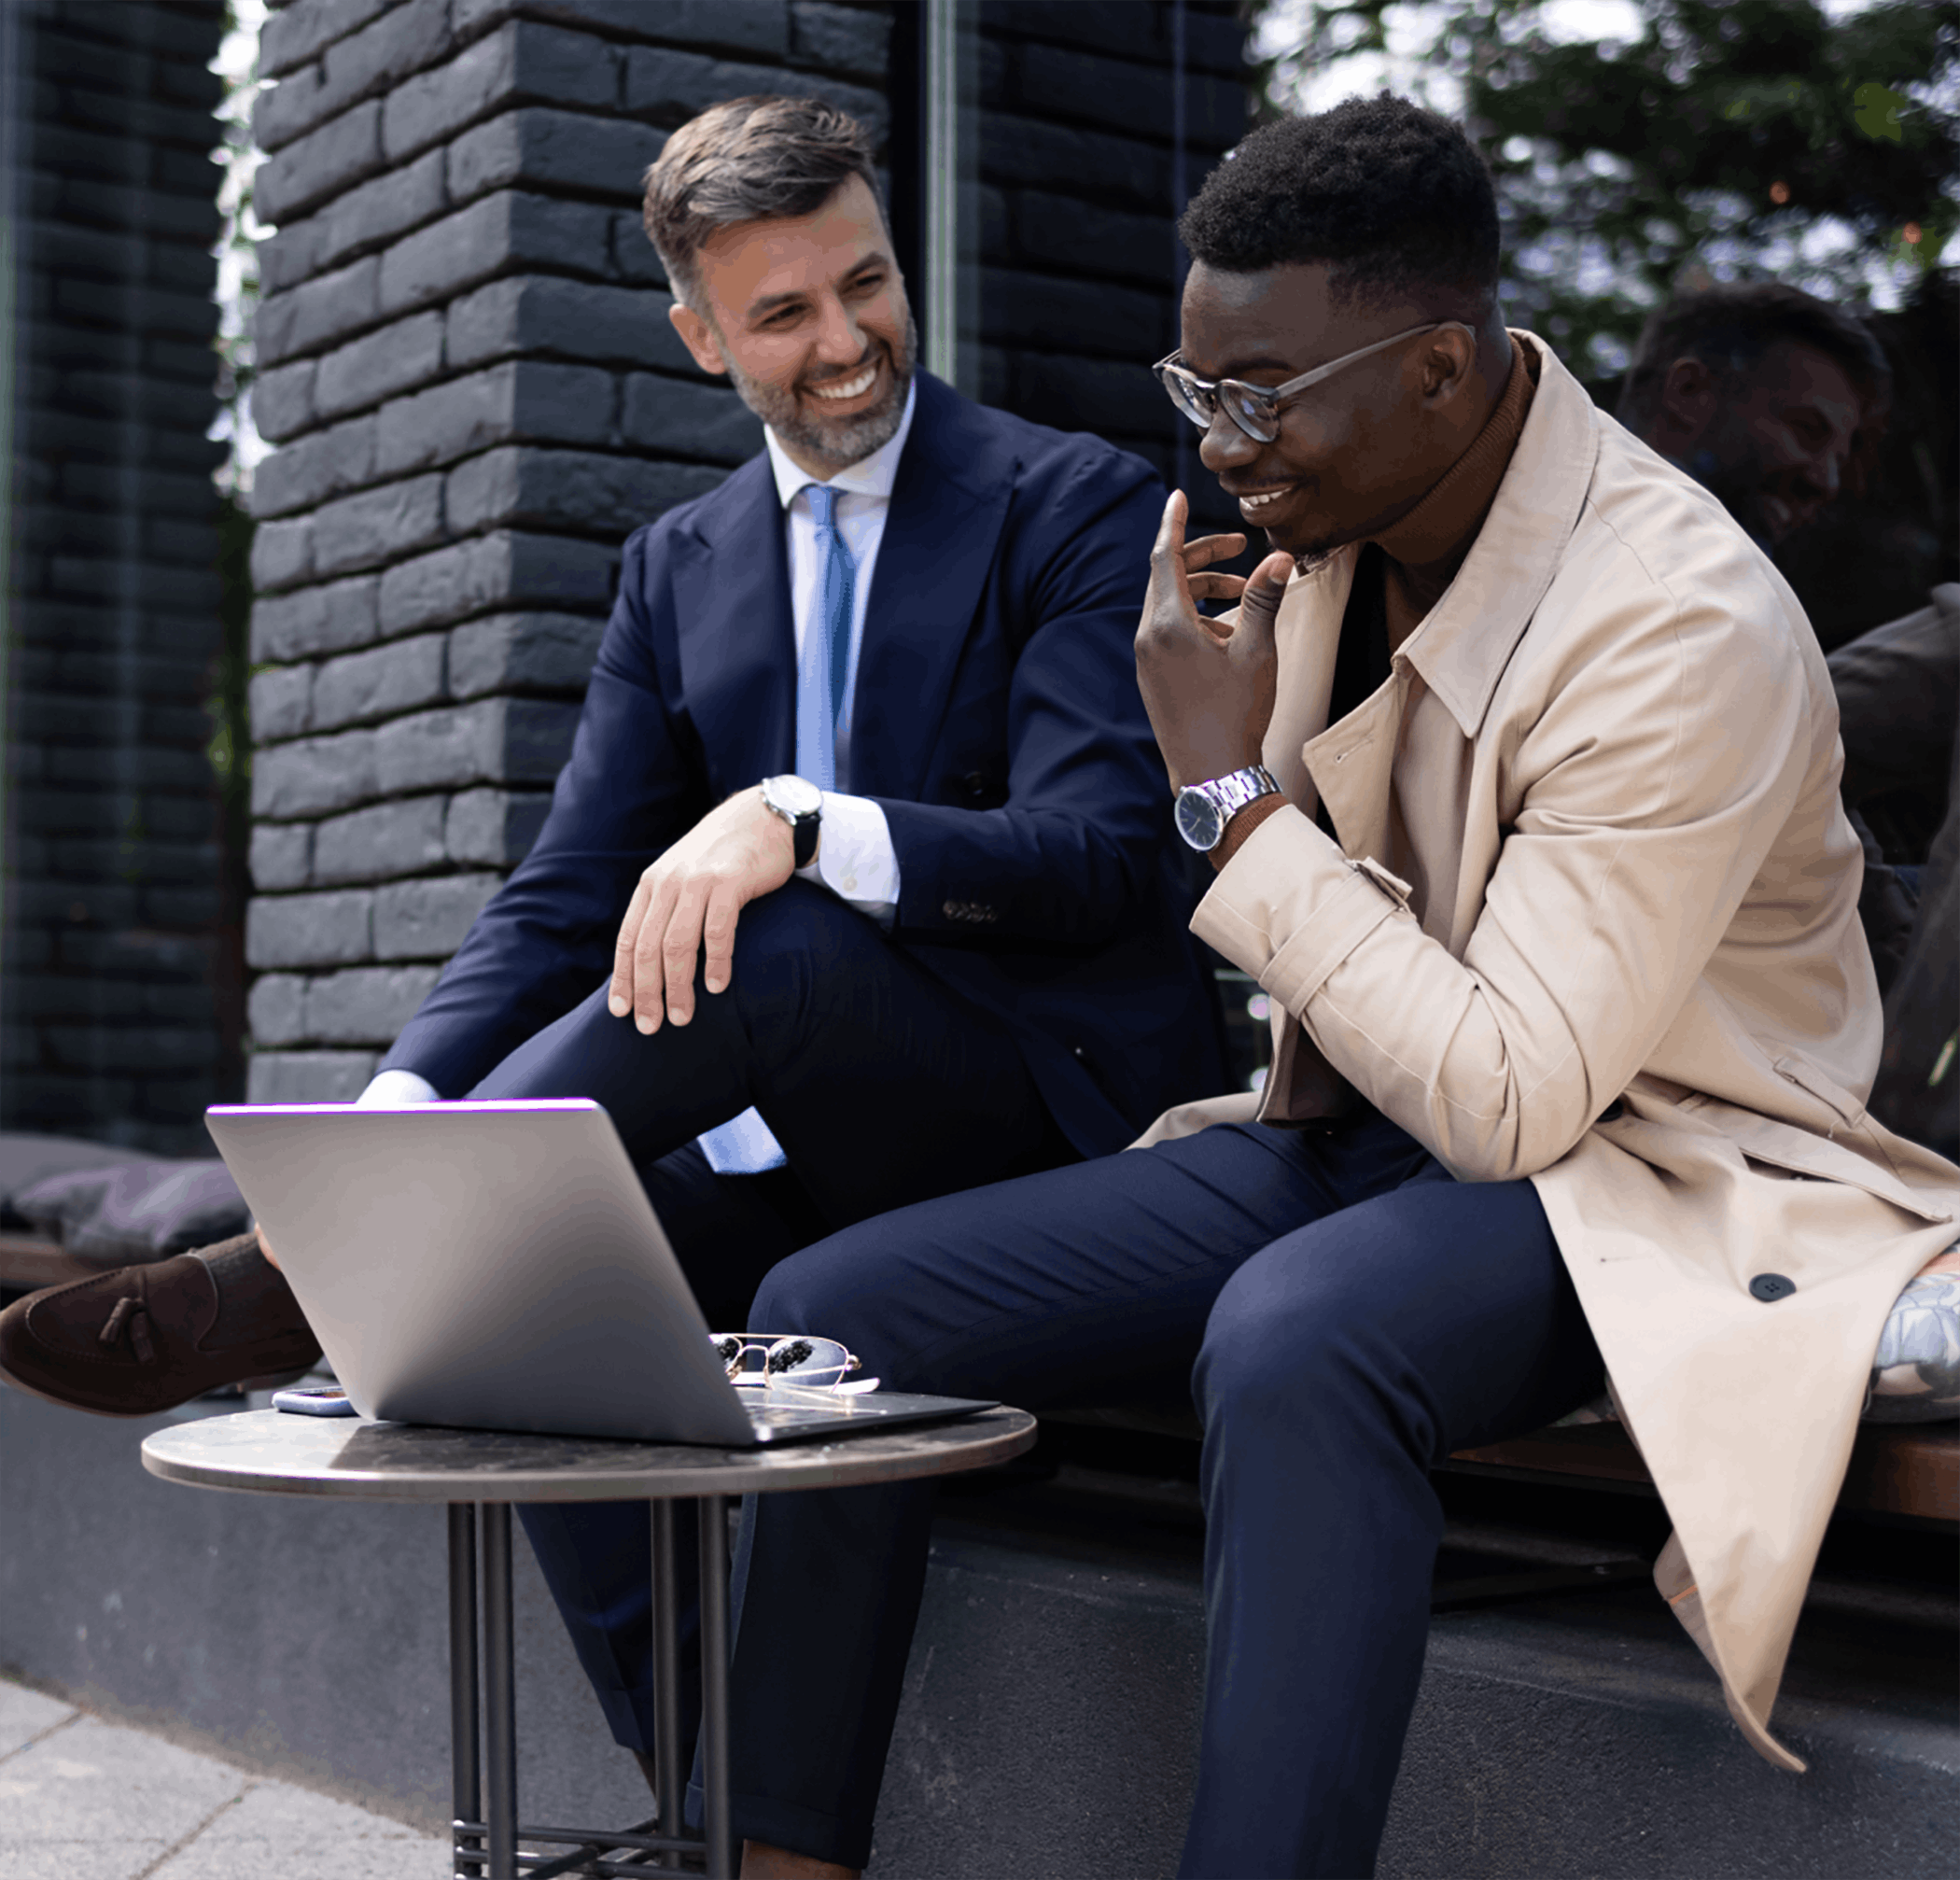 Men meeting outside with laptop